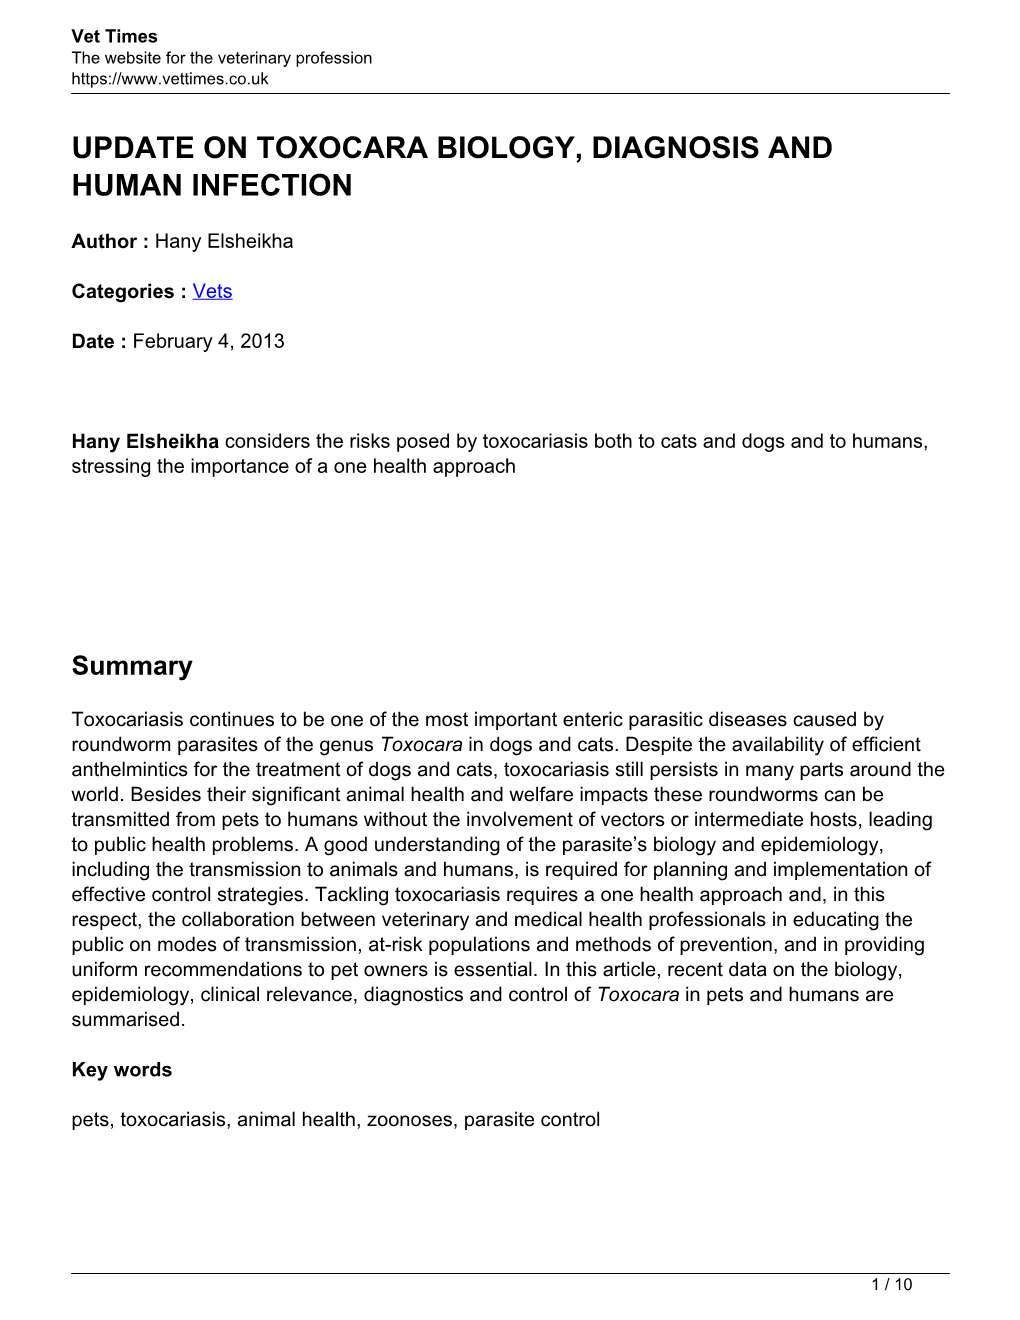 Update on Toxocara Biology, Diagnosis and Human Infection